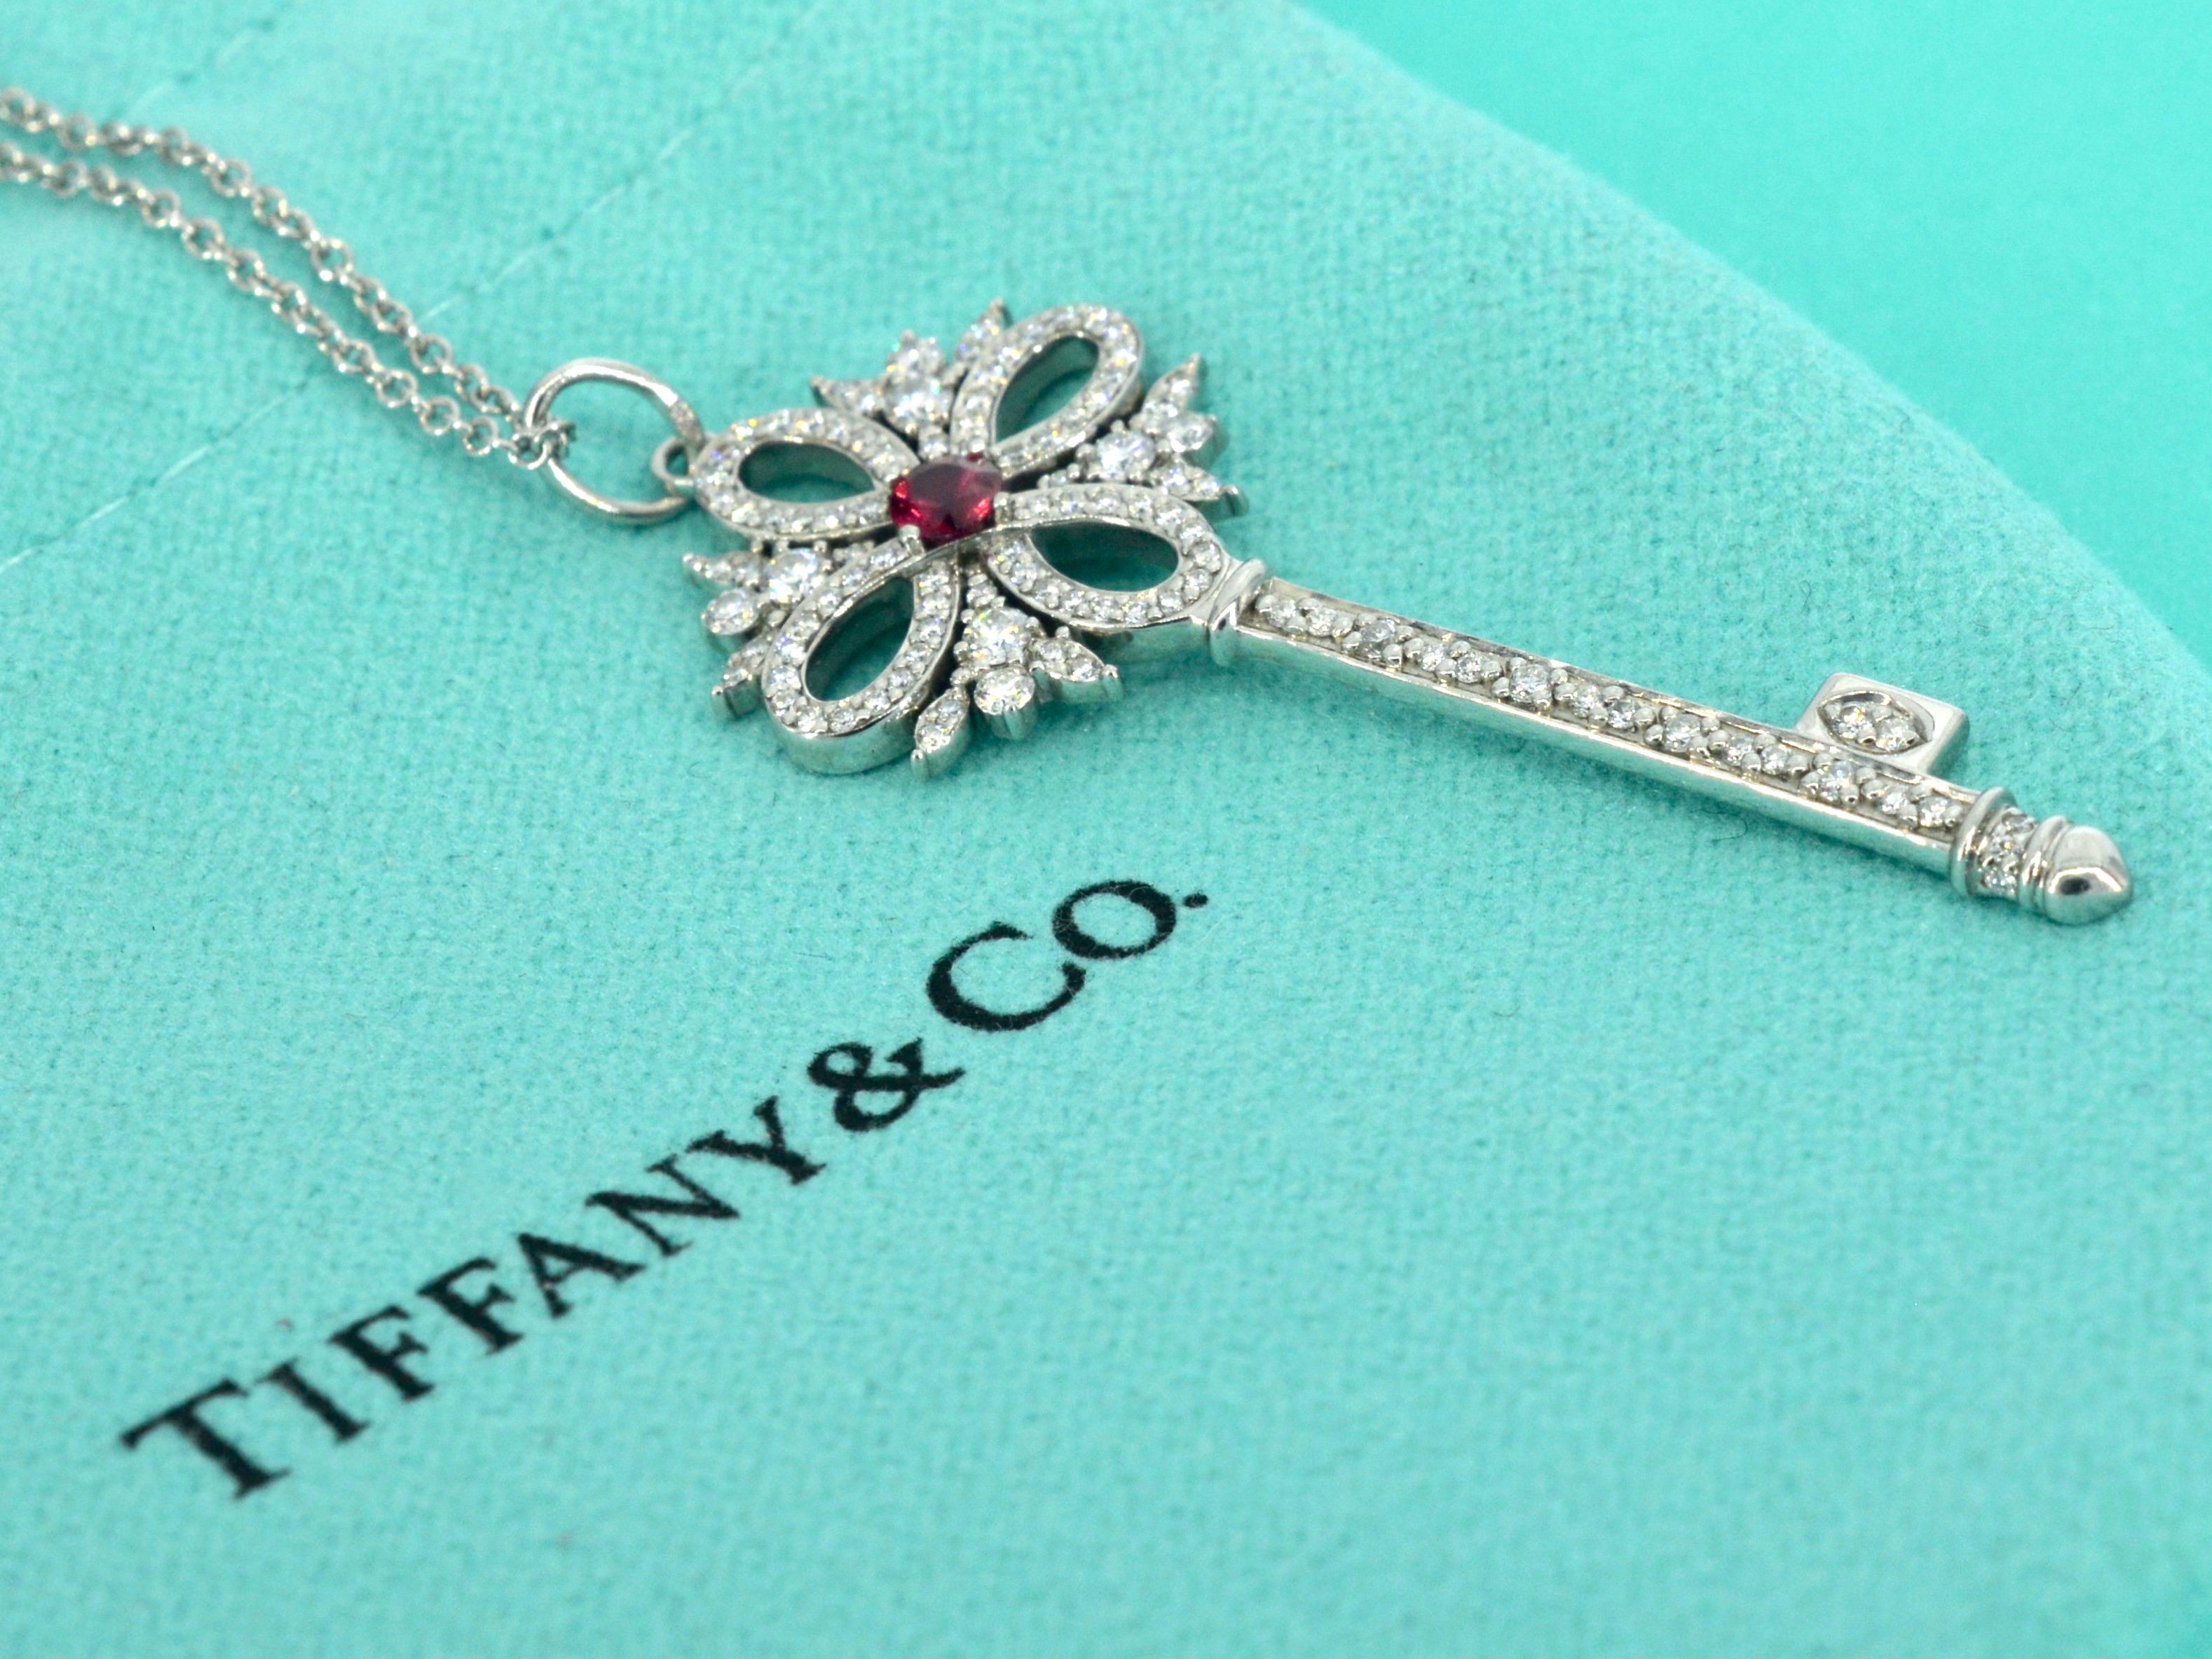 A captivating Tiffany & Co necklace from the Tiffany Keys collection, featuring the exquisite Victoria Key Pendant. This stunning necklace, showcases a brilliant-cut diamond of 0.26 carats, boasting the exceptional brilliance of original T&CO